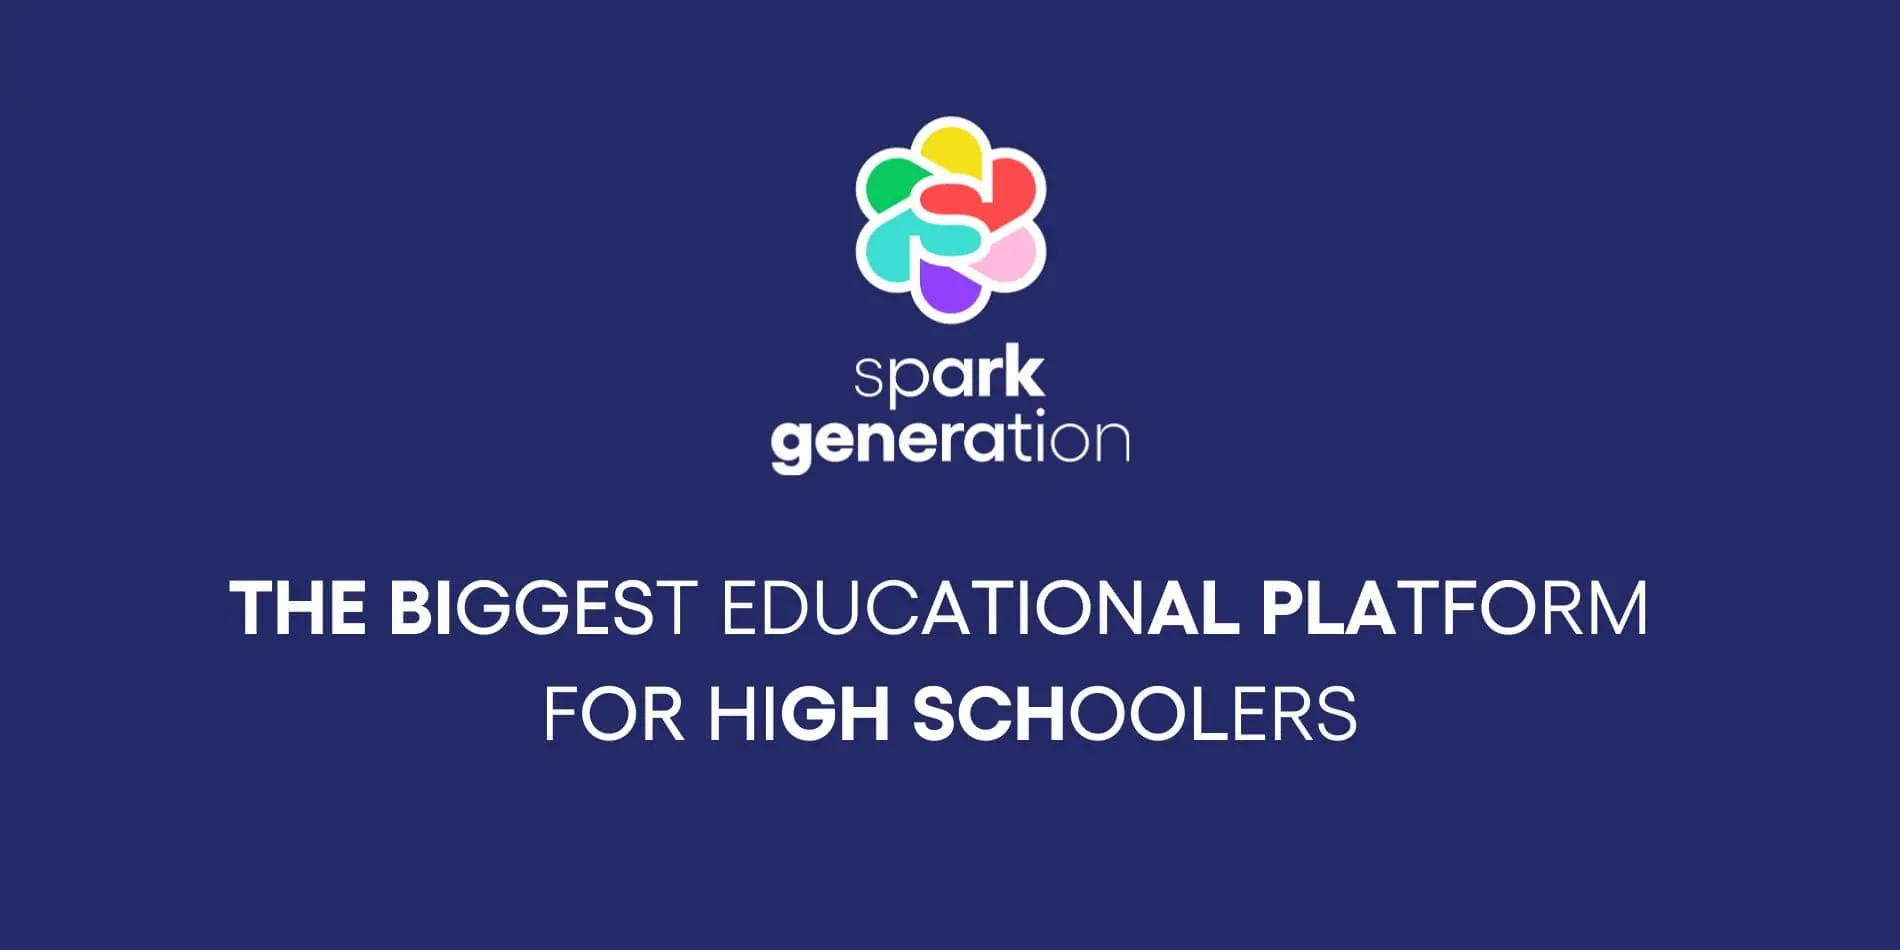 spark-generation-cover-photo spark-generation-cover-photo Spark Generation spark-generation-cover-photo Top 3 Fully Accredited British GCSE Online Schools | World Schools